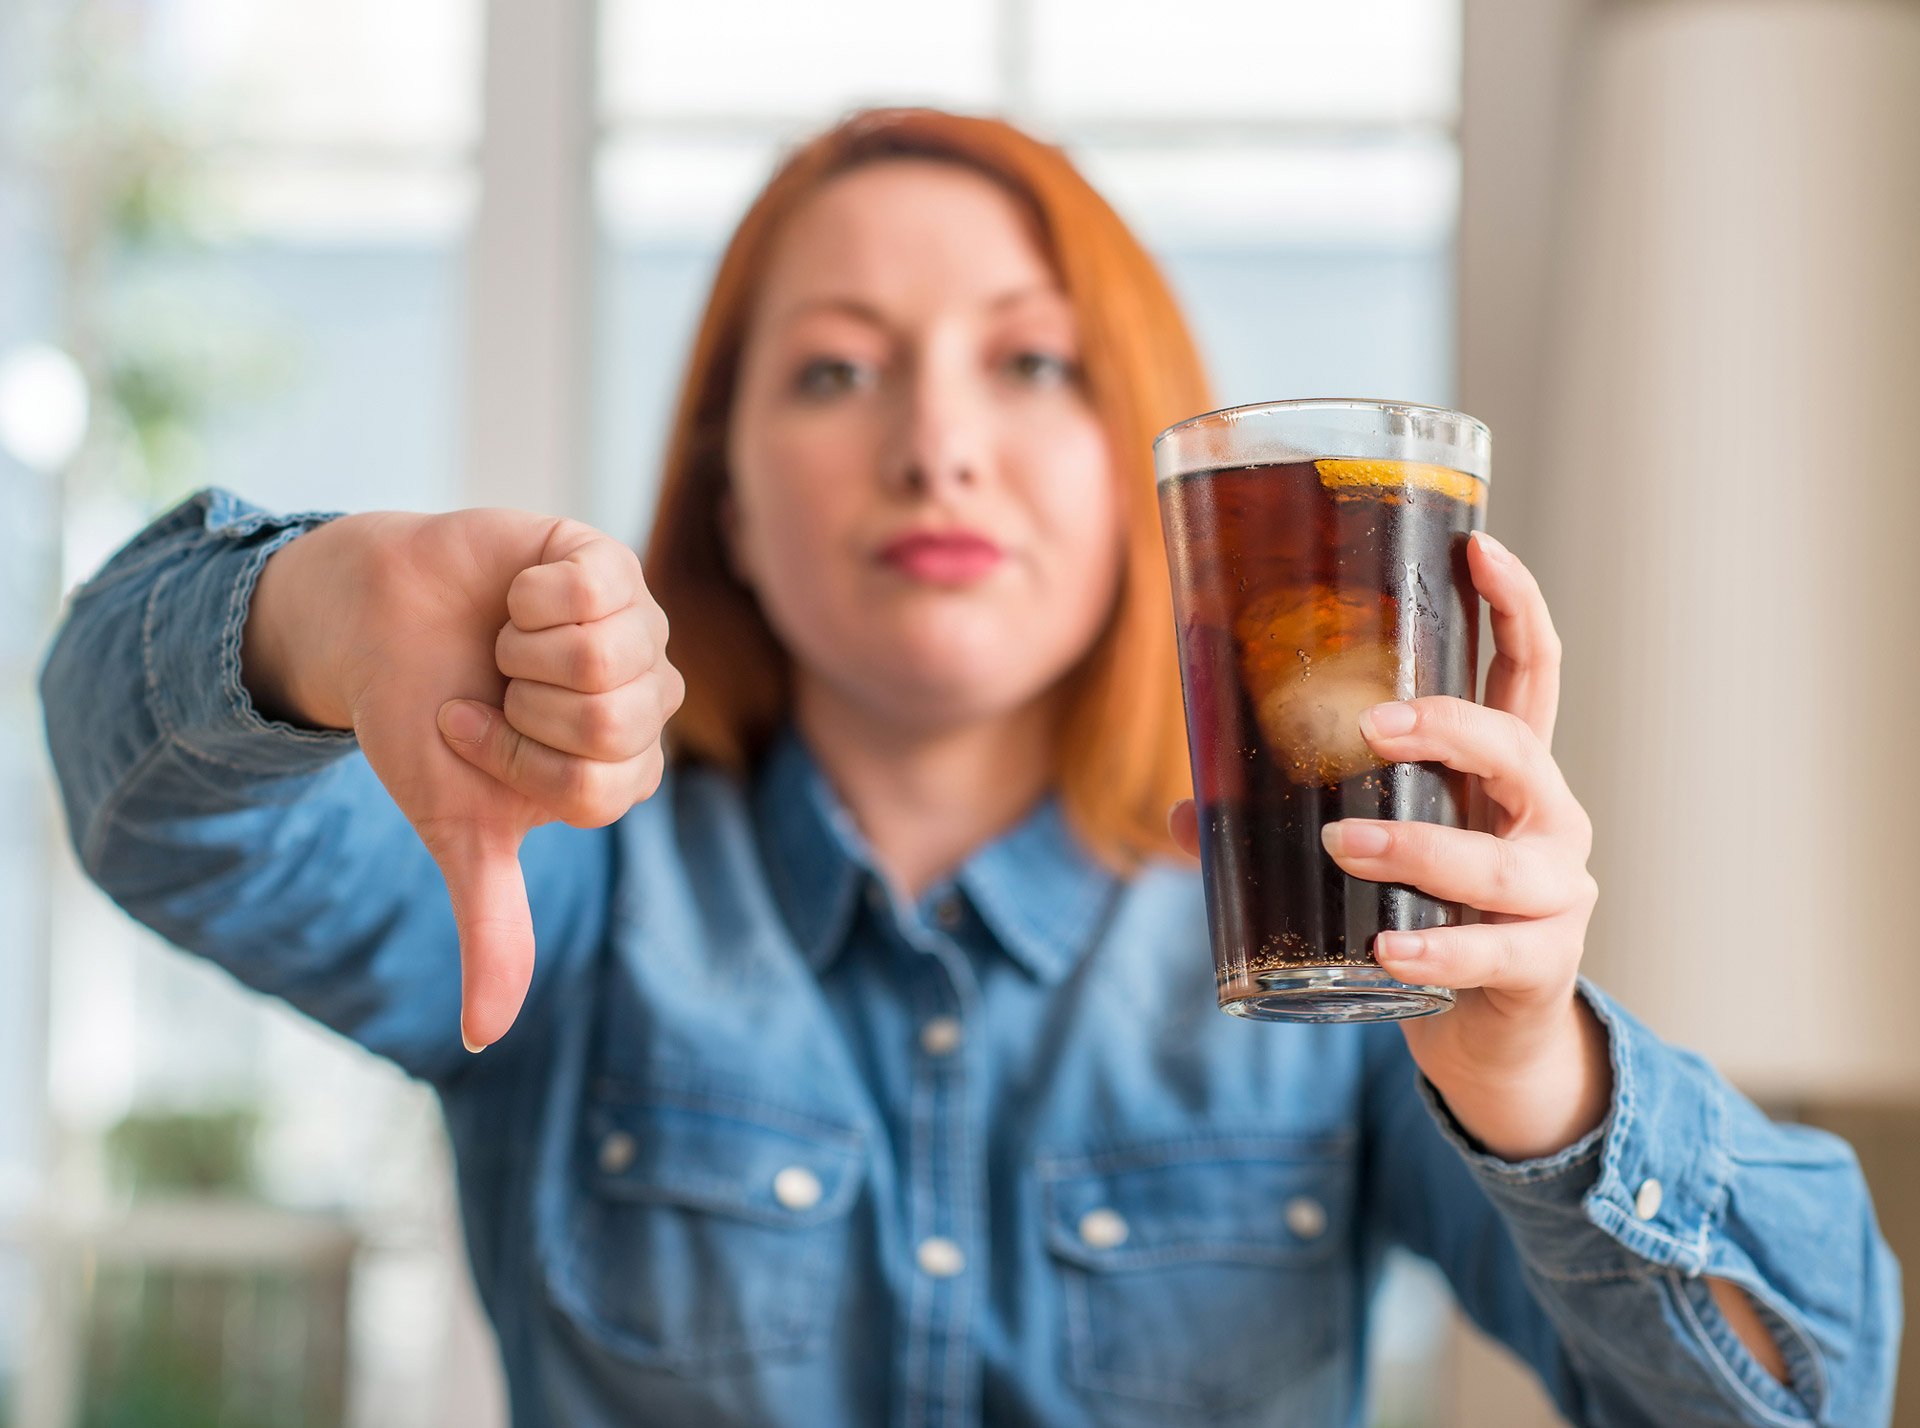 Woman holding soda refreshment with thumb down. Artificially sweet soft drinks are not foods that increase fertility in females